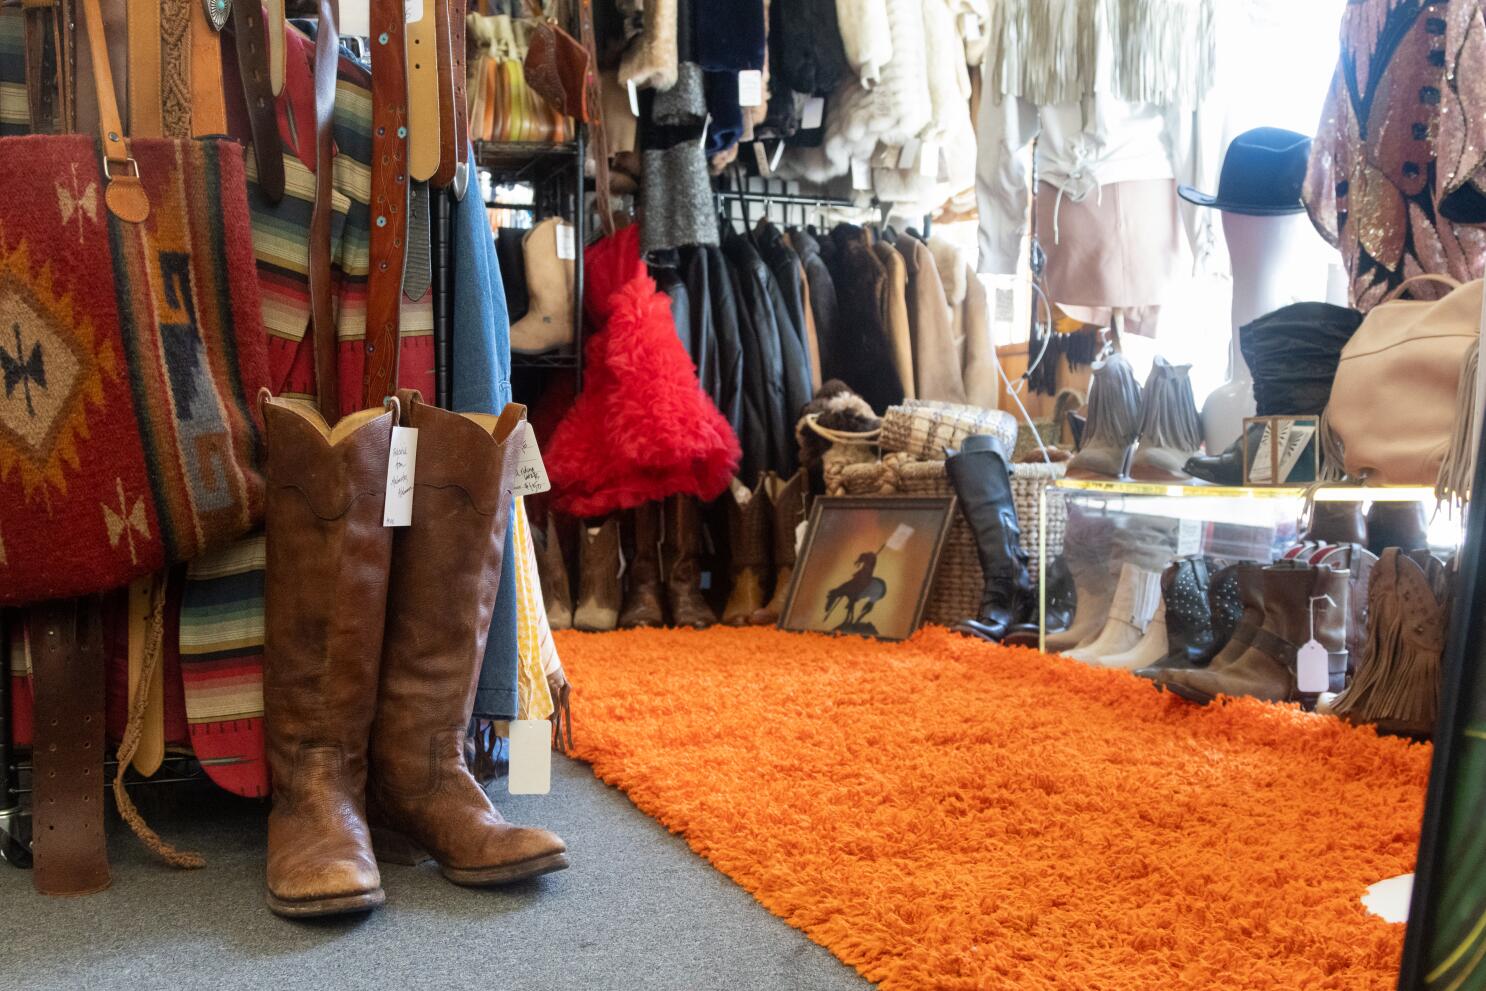 5 resale and consignment shops to visit when you're spring cleaning